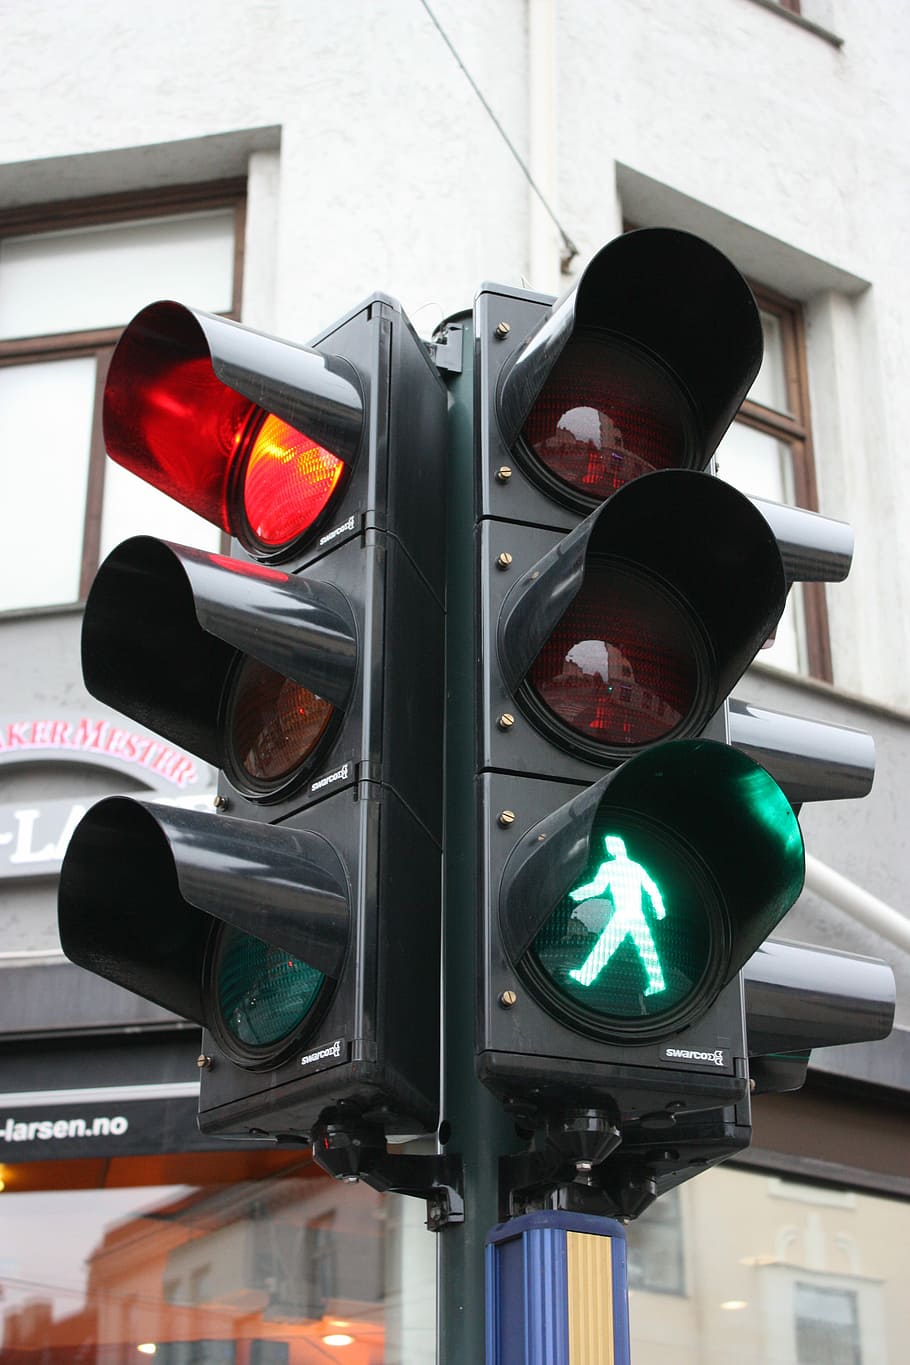 Lights, Traffic, Light, Signal, traffic lights, traffic, light signal, stoplight, red light, green color, outdoors